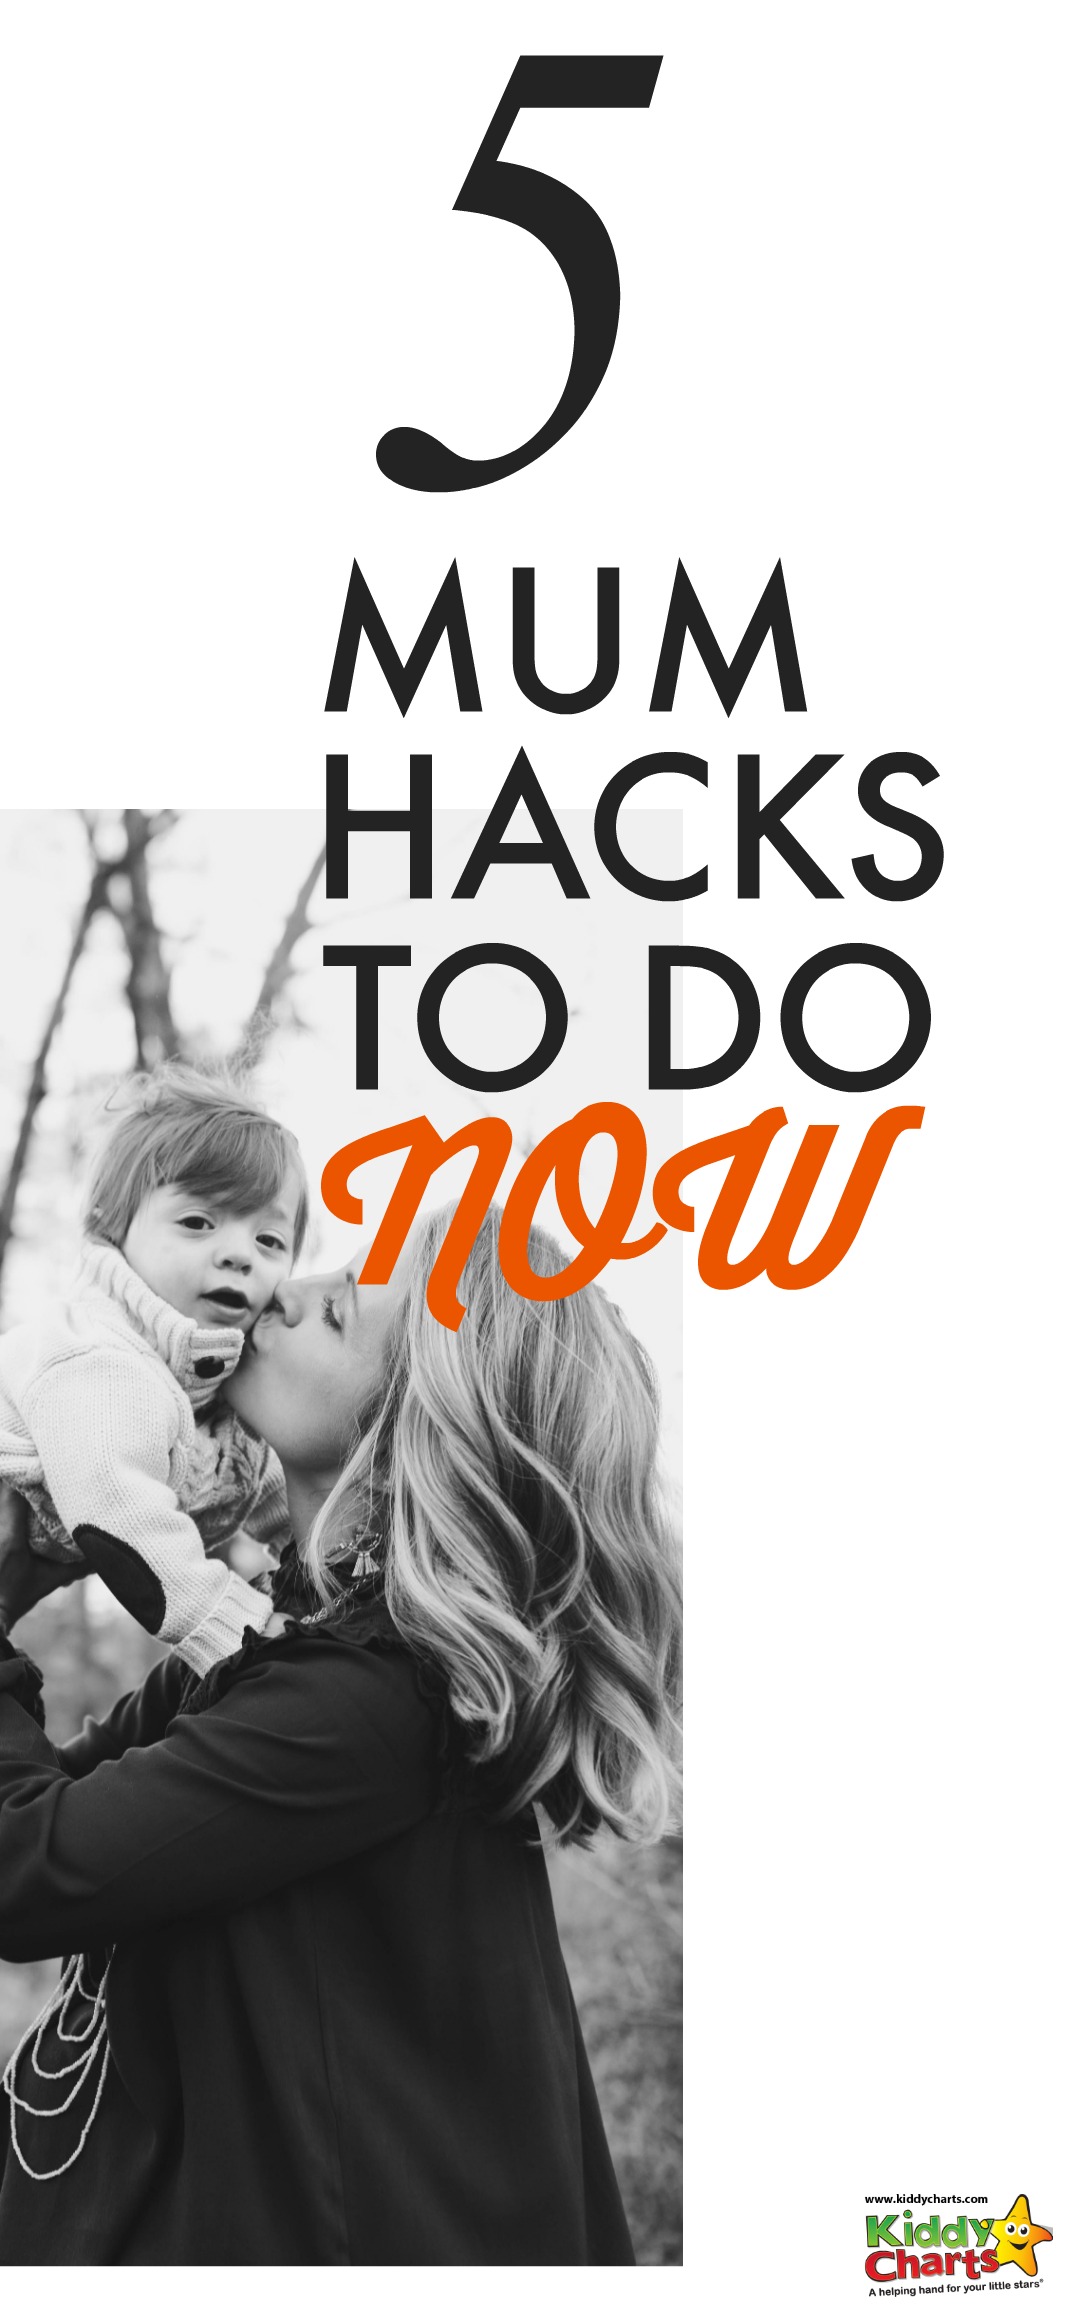 5 mum hacks to do today - go on take a look!